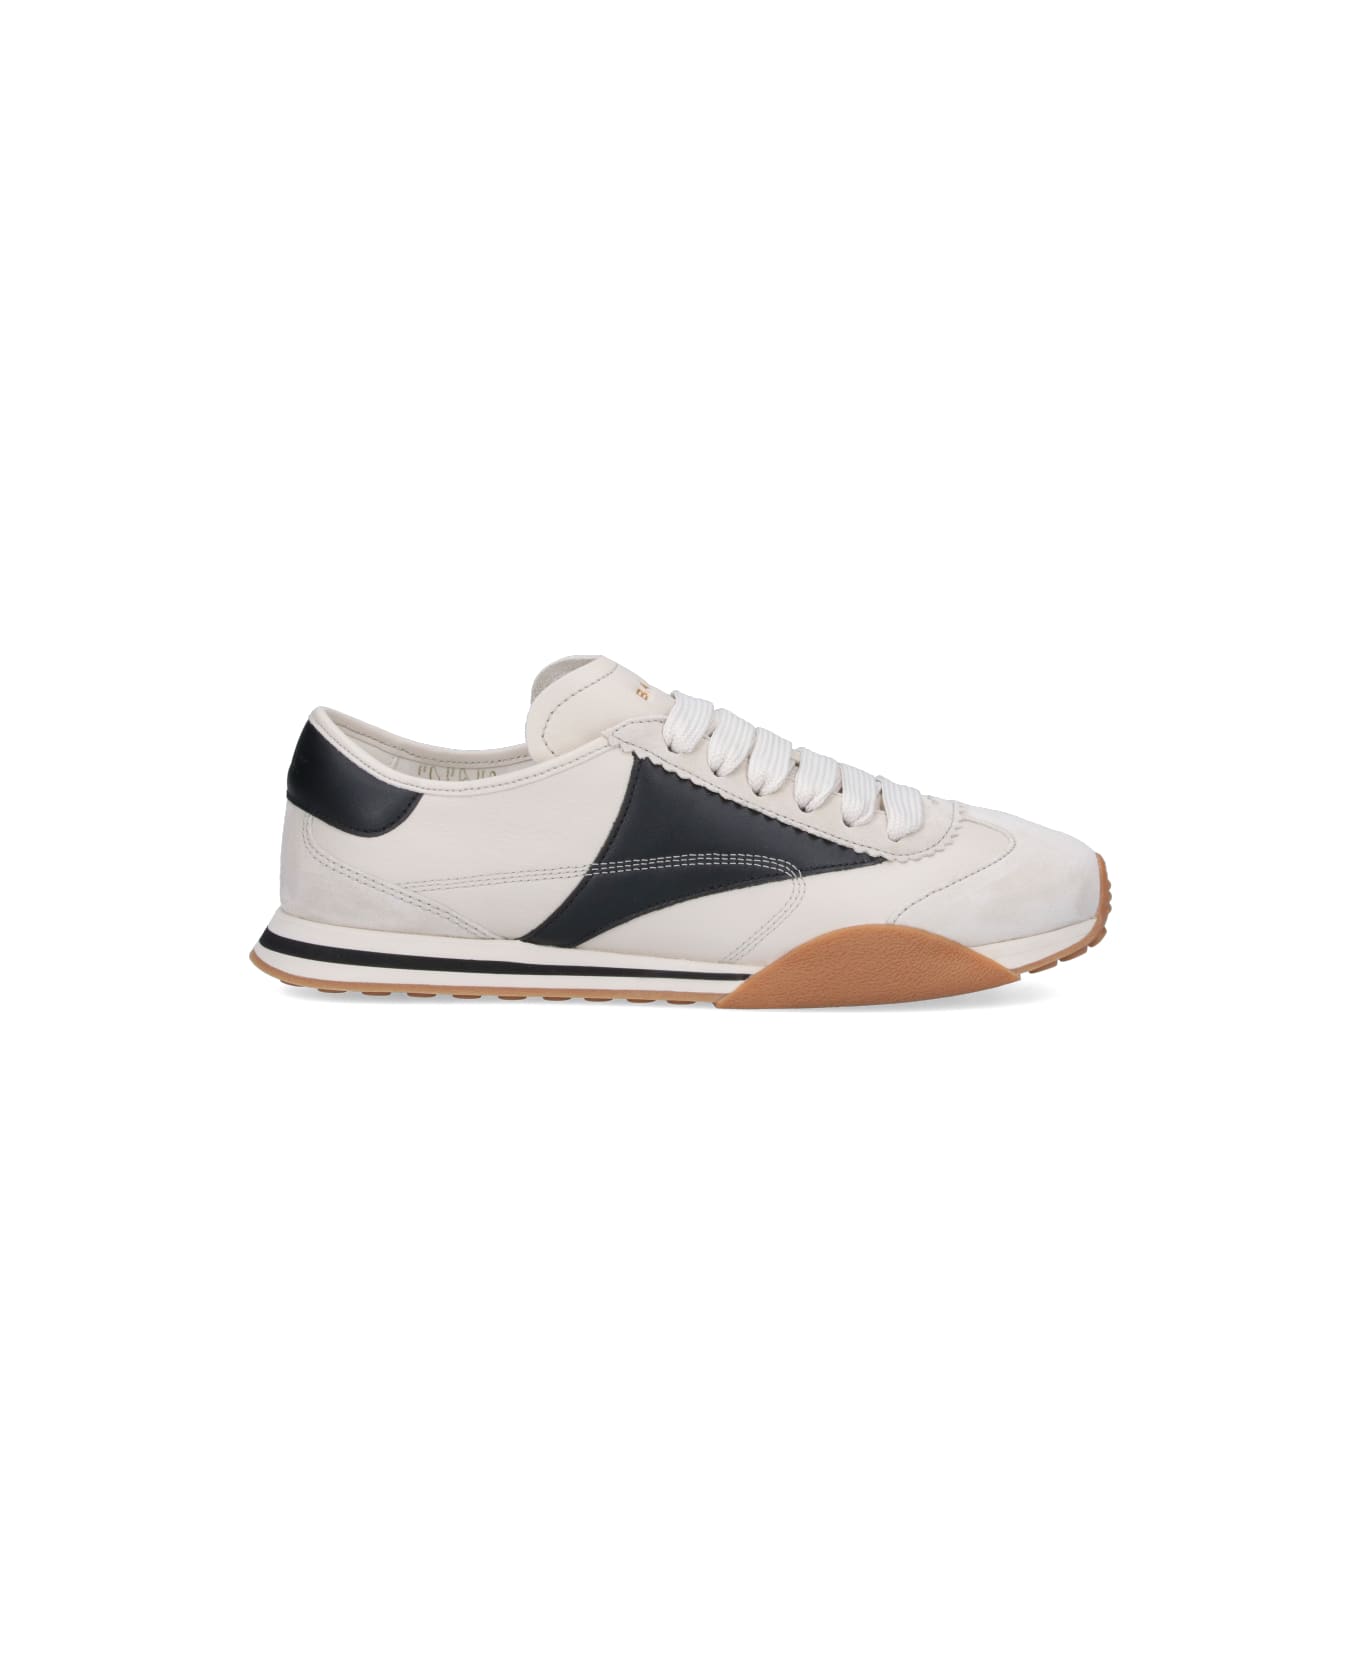 Bally "sussex" Sneakers - Crema